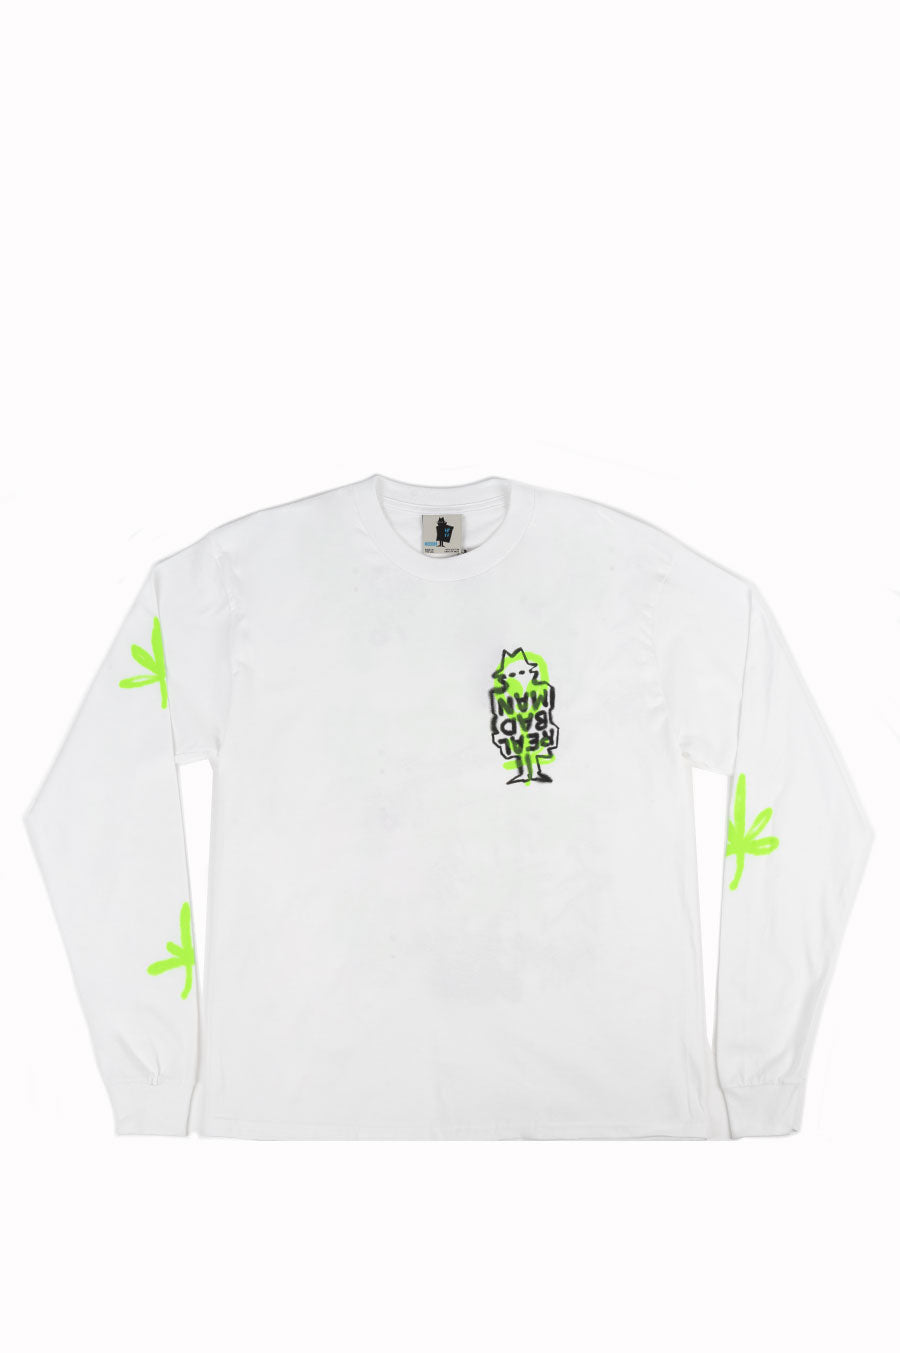 Real Bad Man + Gramicci Dude L/S Tee 'White' – Limited Edt